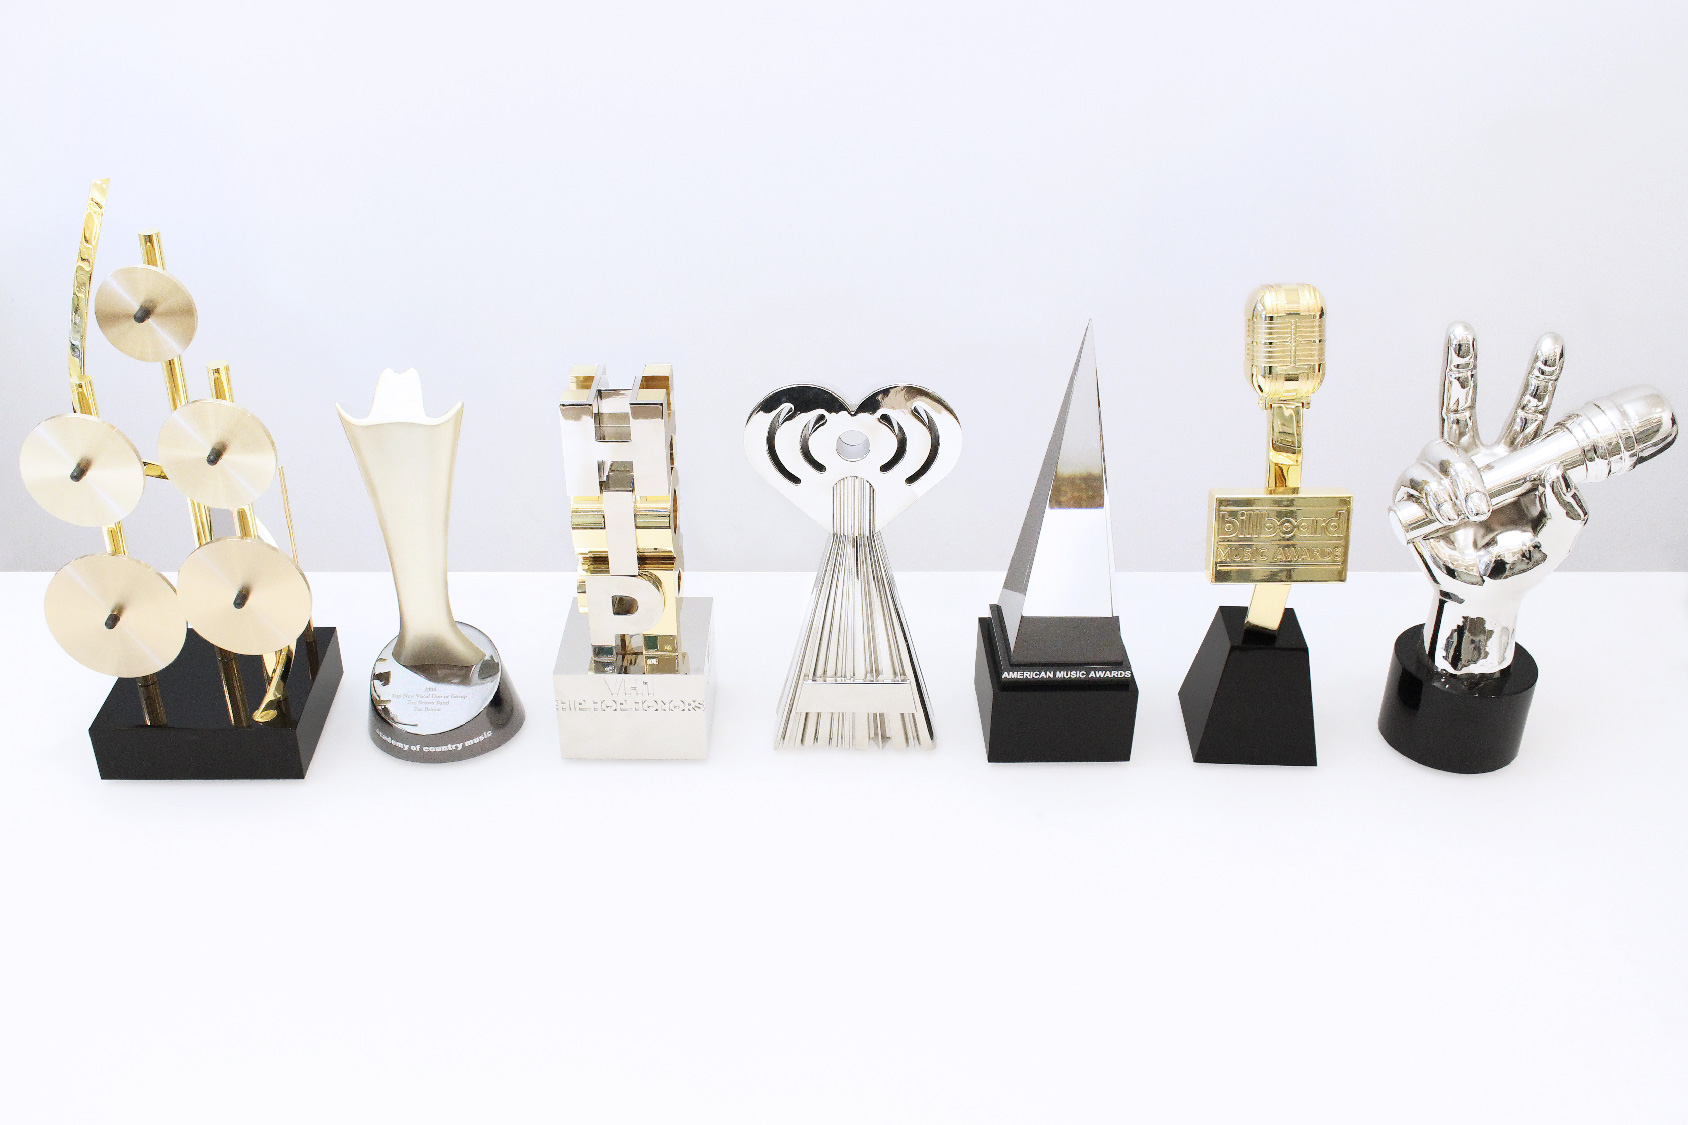 Front view of seven famous custom music awards program trophies, all crafted by Society Awards